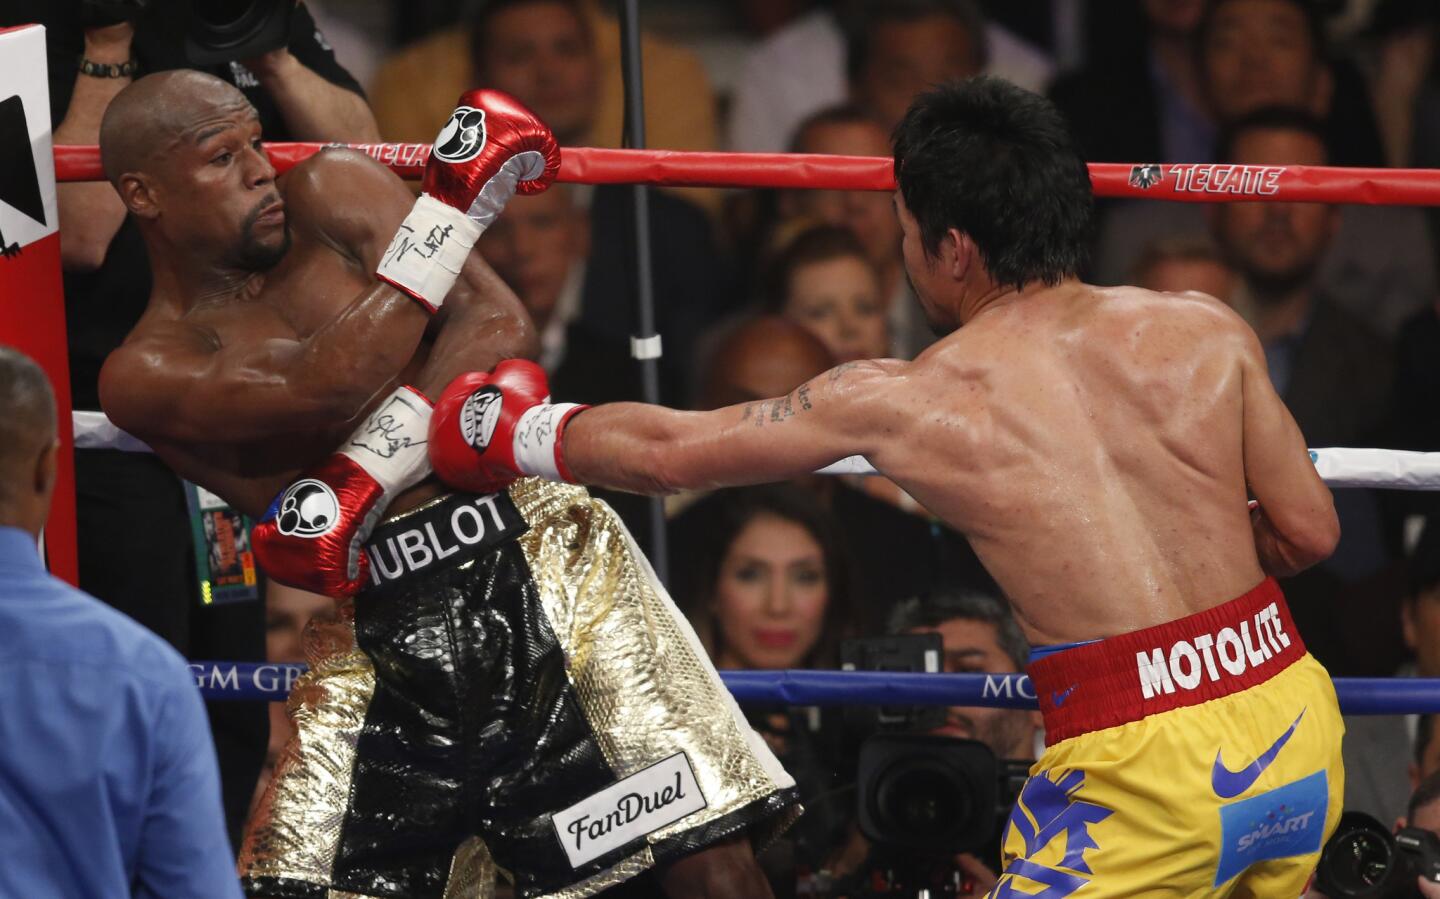 Pacquiao punches Mayweather near the ropes.